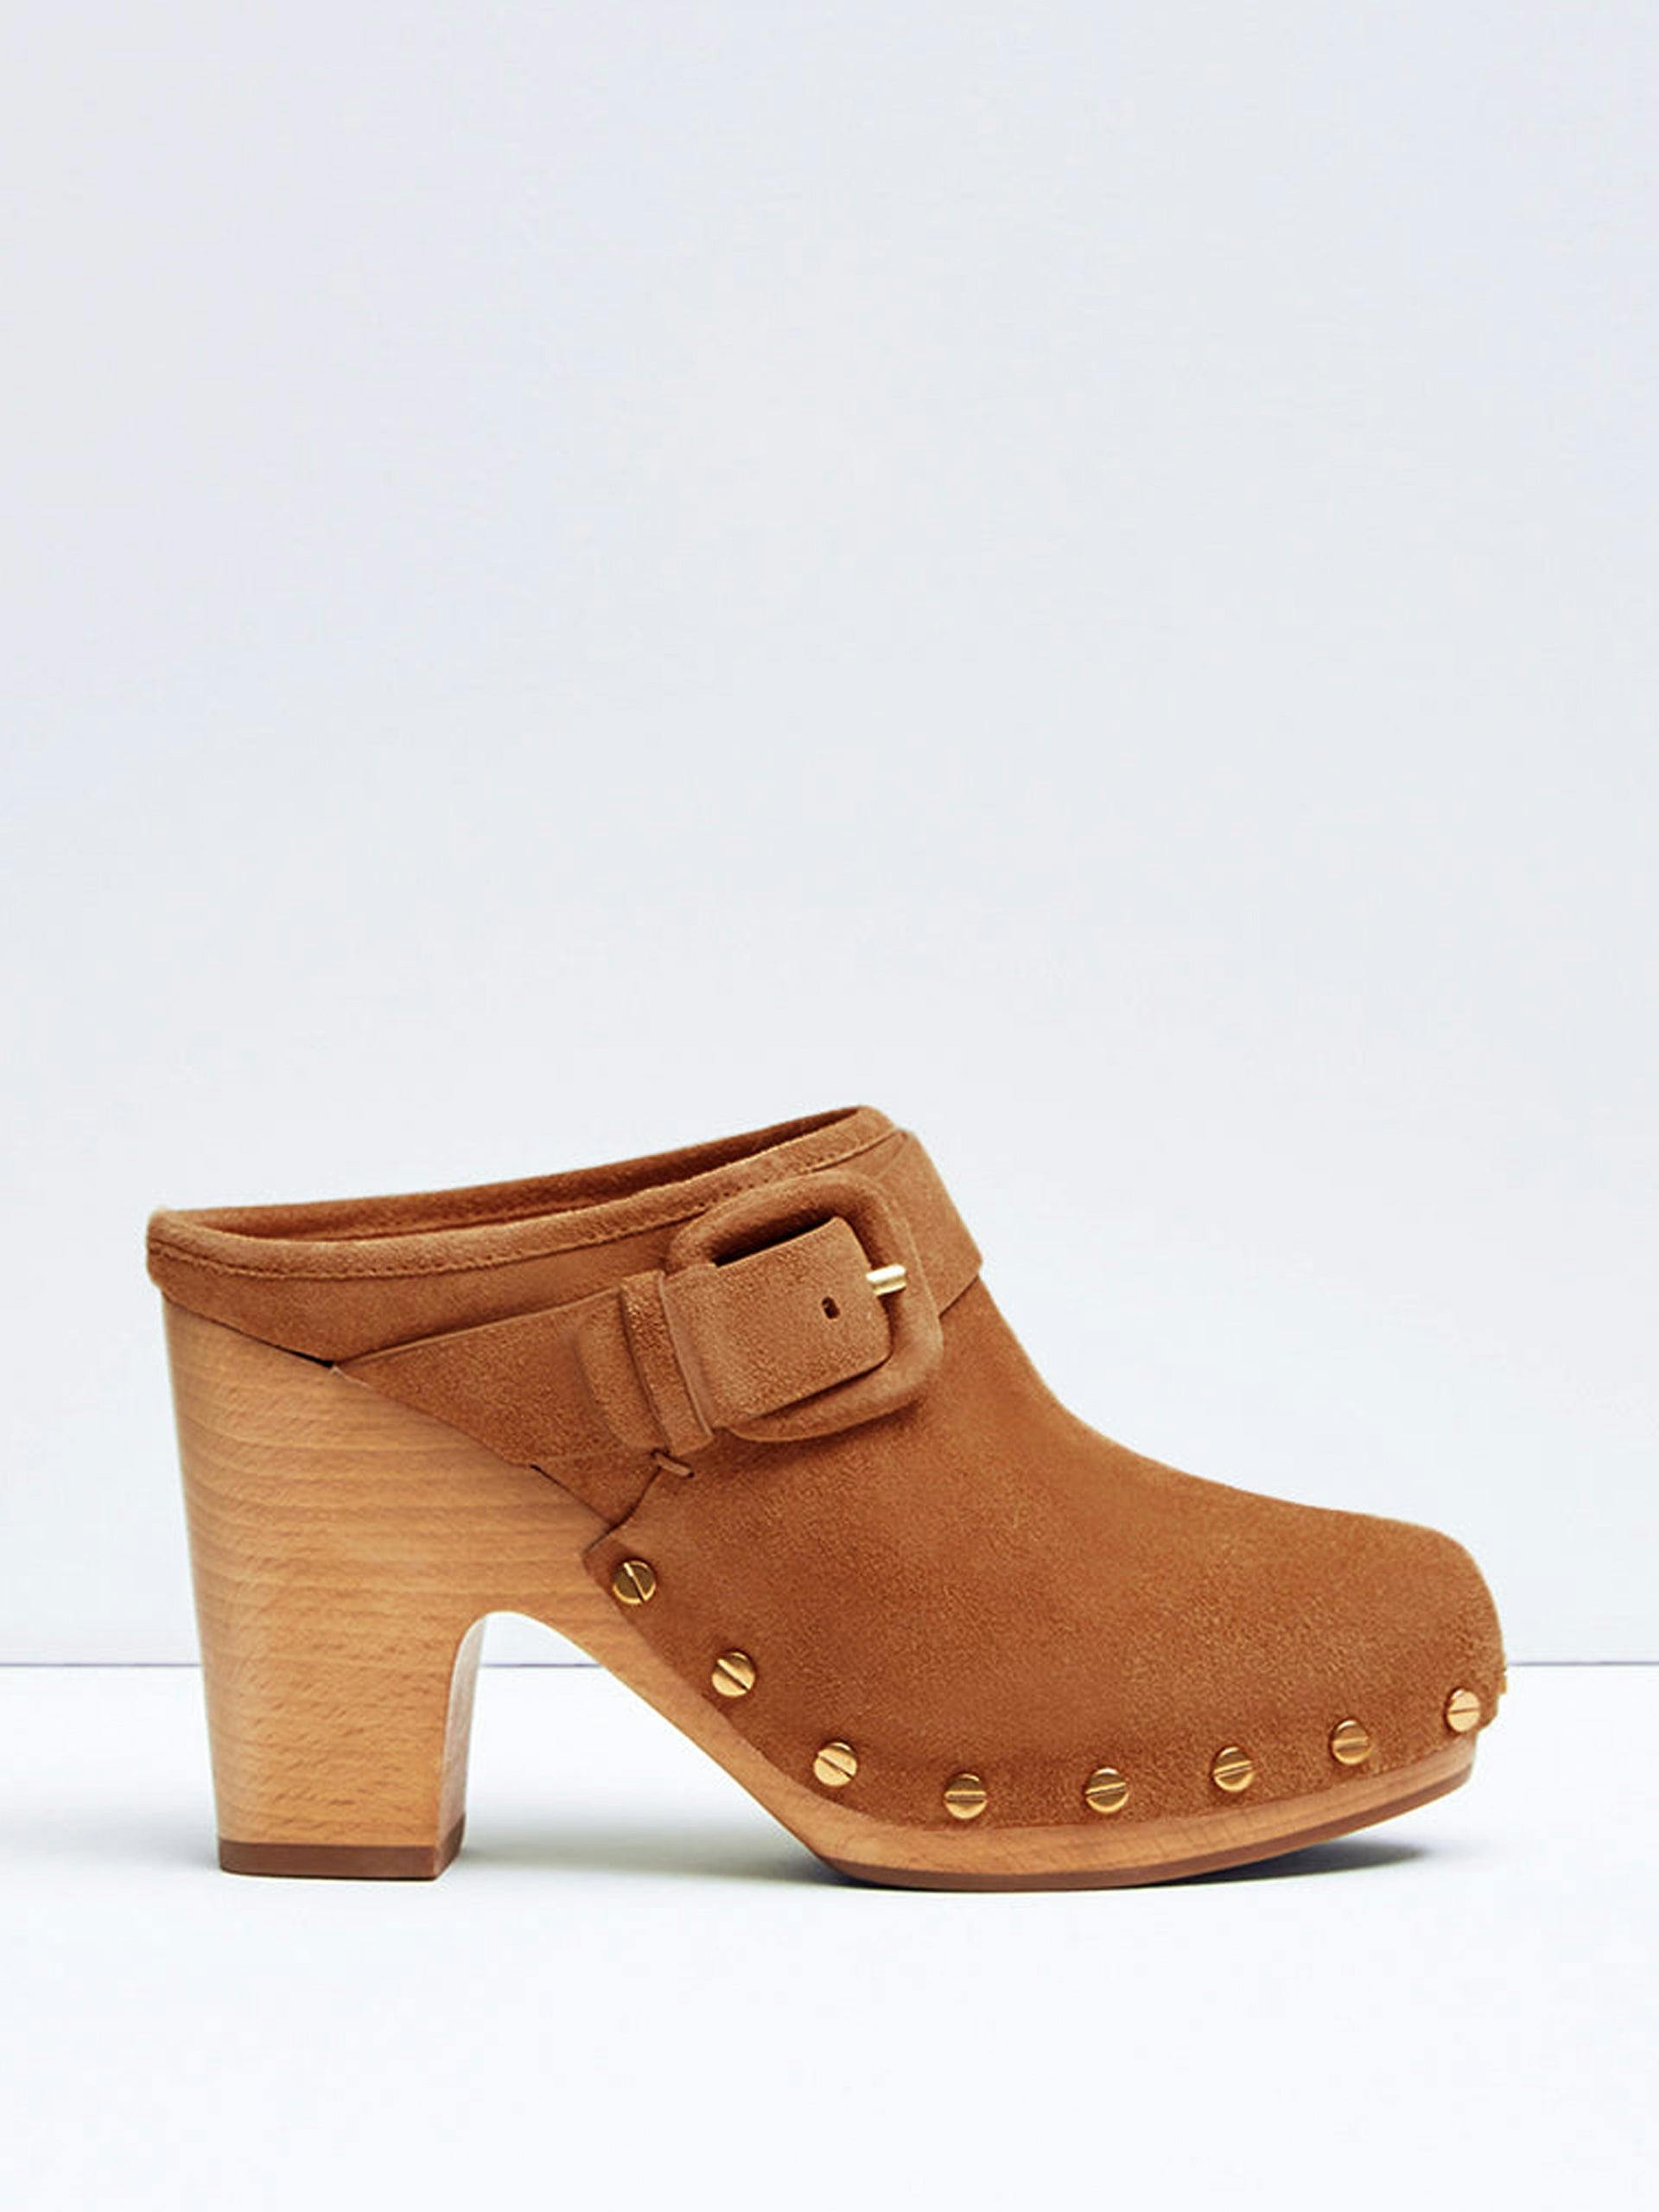 Brown suede studded clogs